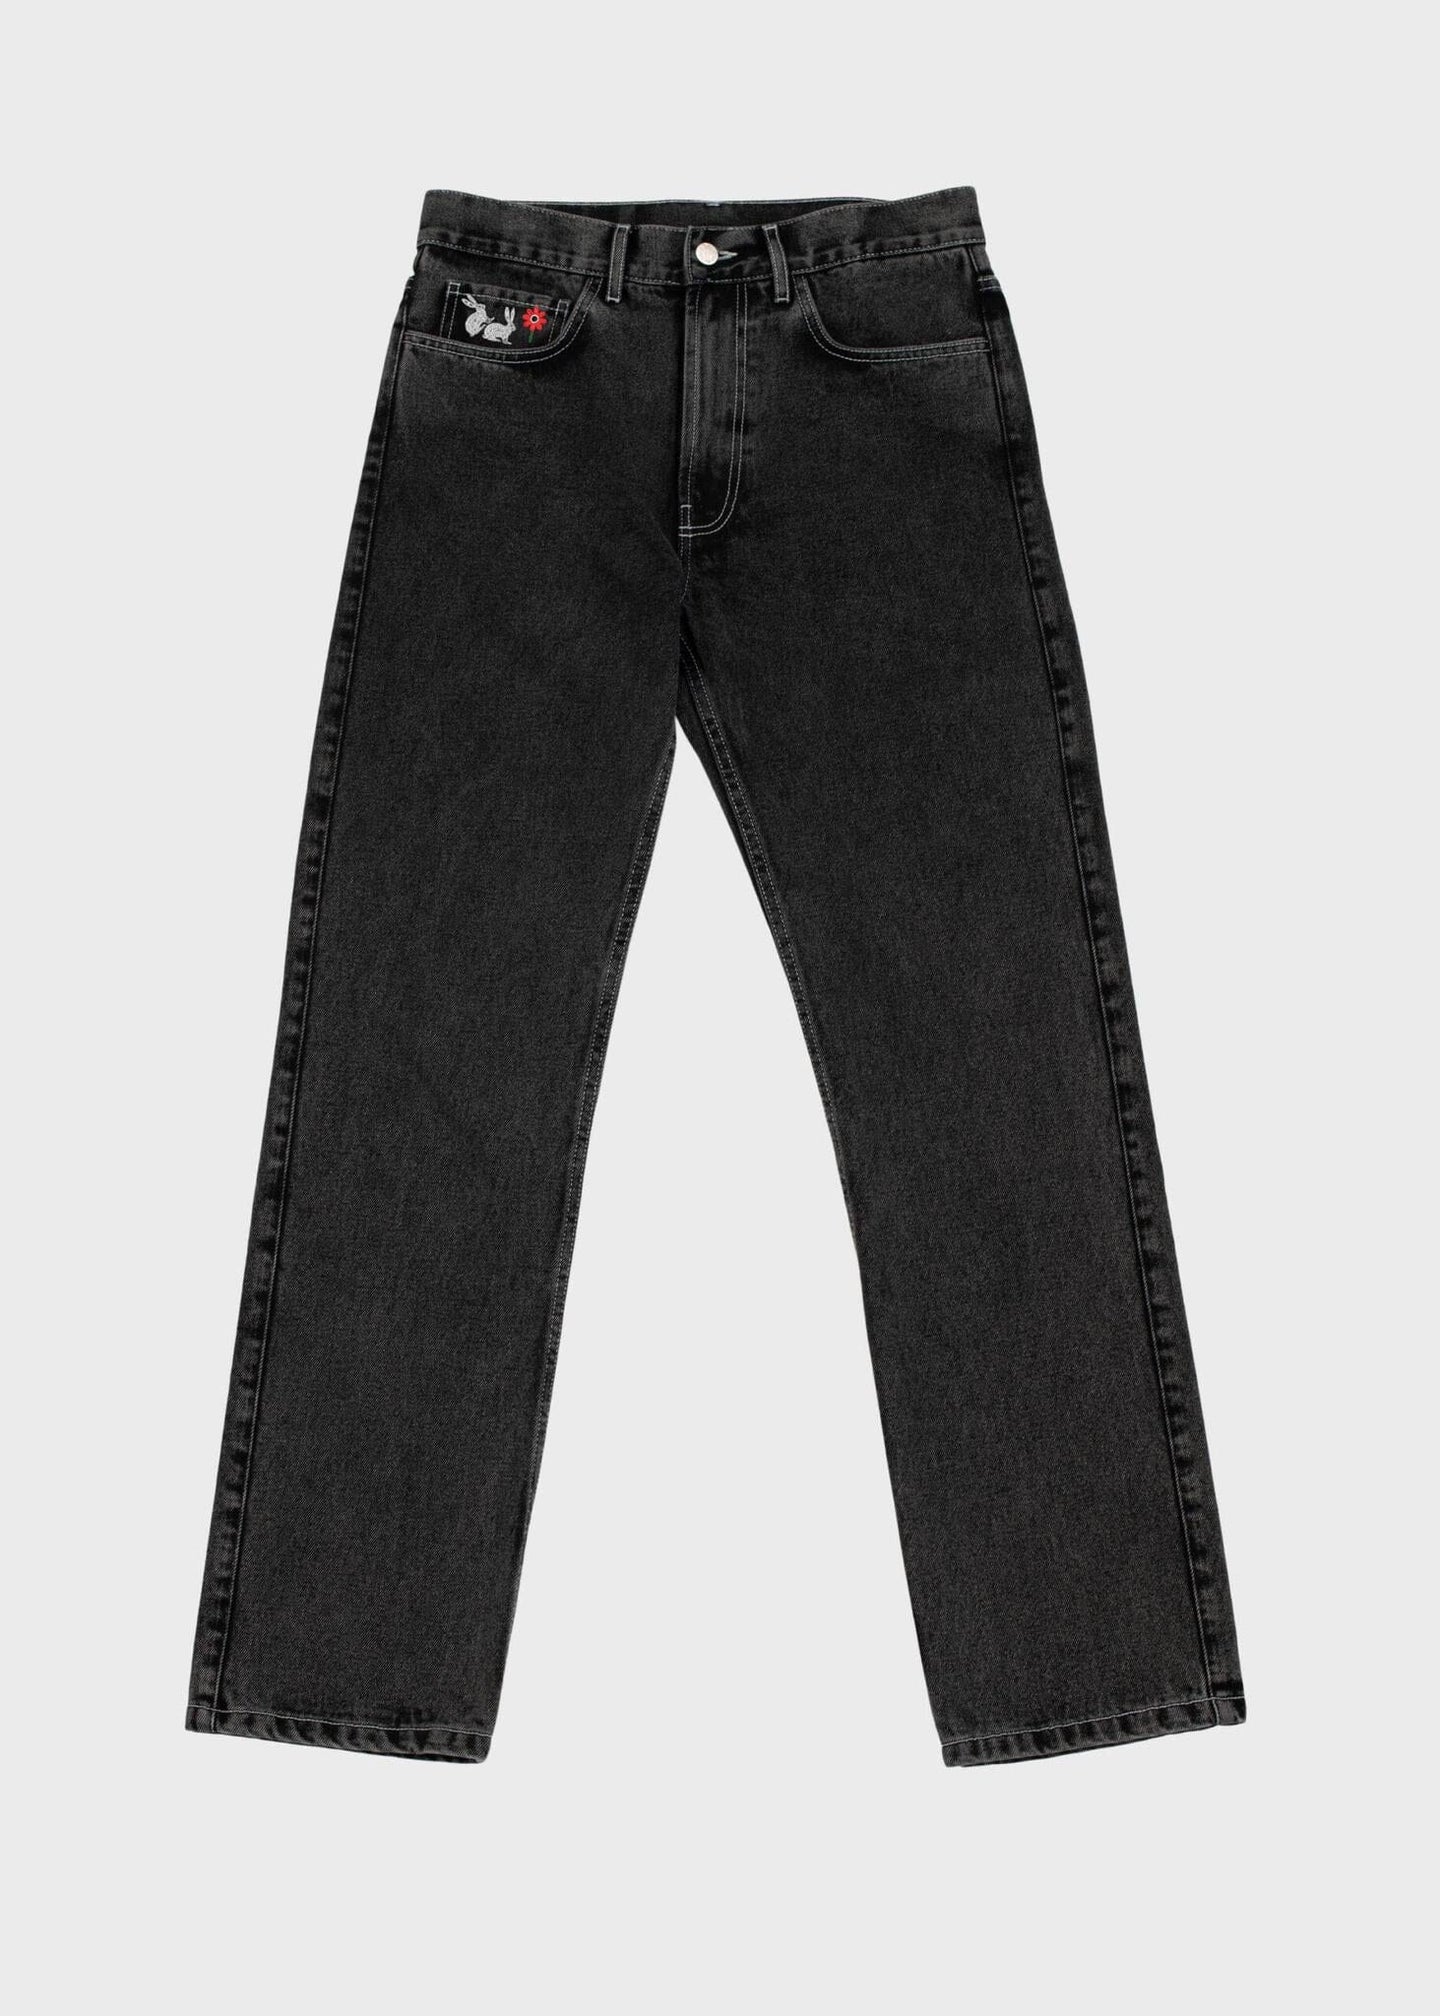 Saturday Night Beaver Jeans (Washed Black) – Congruent Space *₊˚⁎*₊